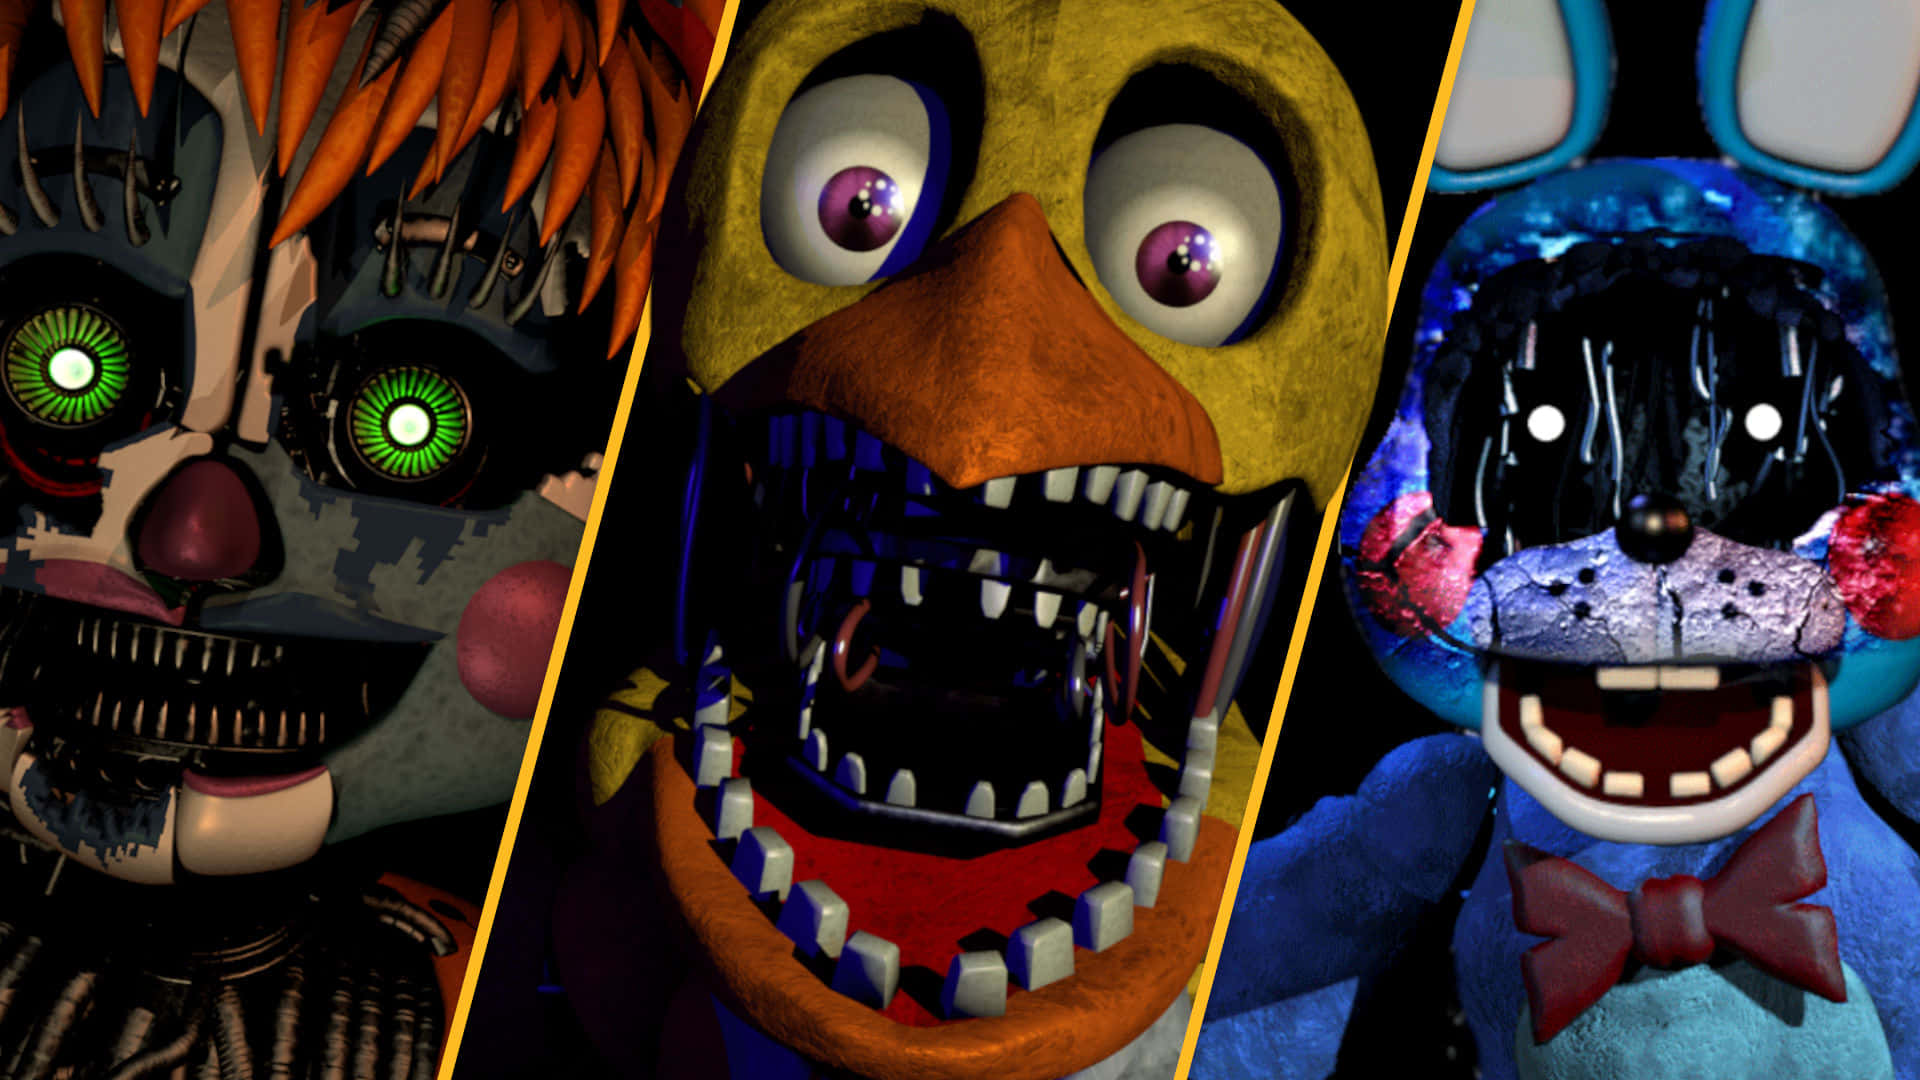 Prepare for a jump scare with Freddy and friends.